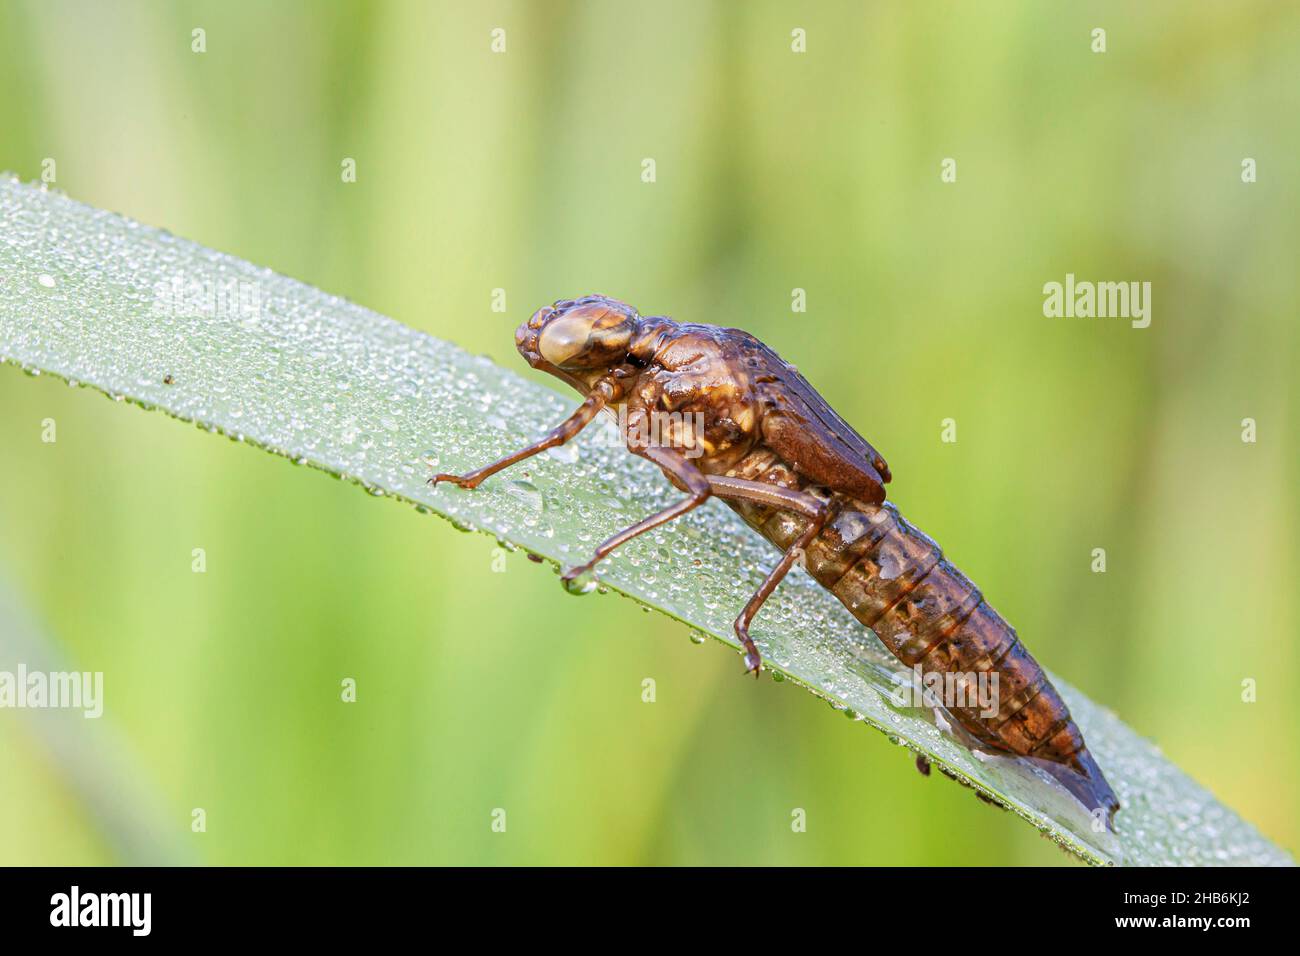 dragonflies; hawkers (Europe) (Anisoptera), Larva leaves water at the end of the larval stage and attaches to a vertical structure for hatching, Stock Photo